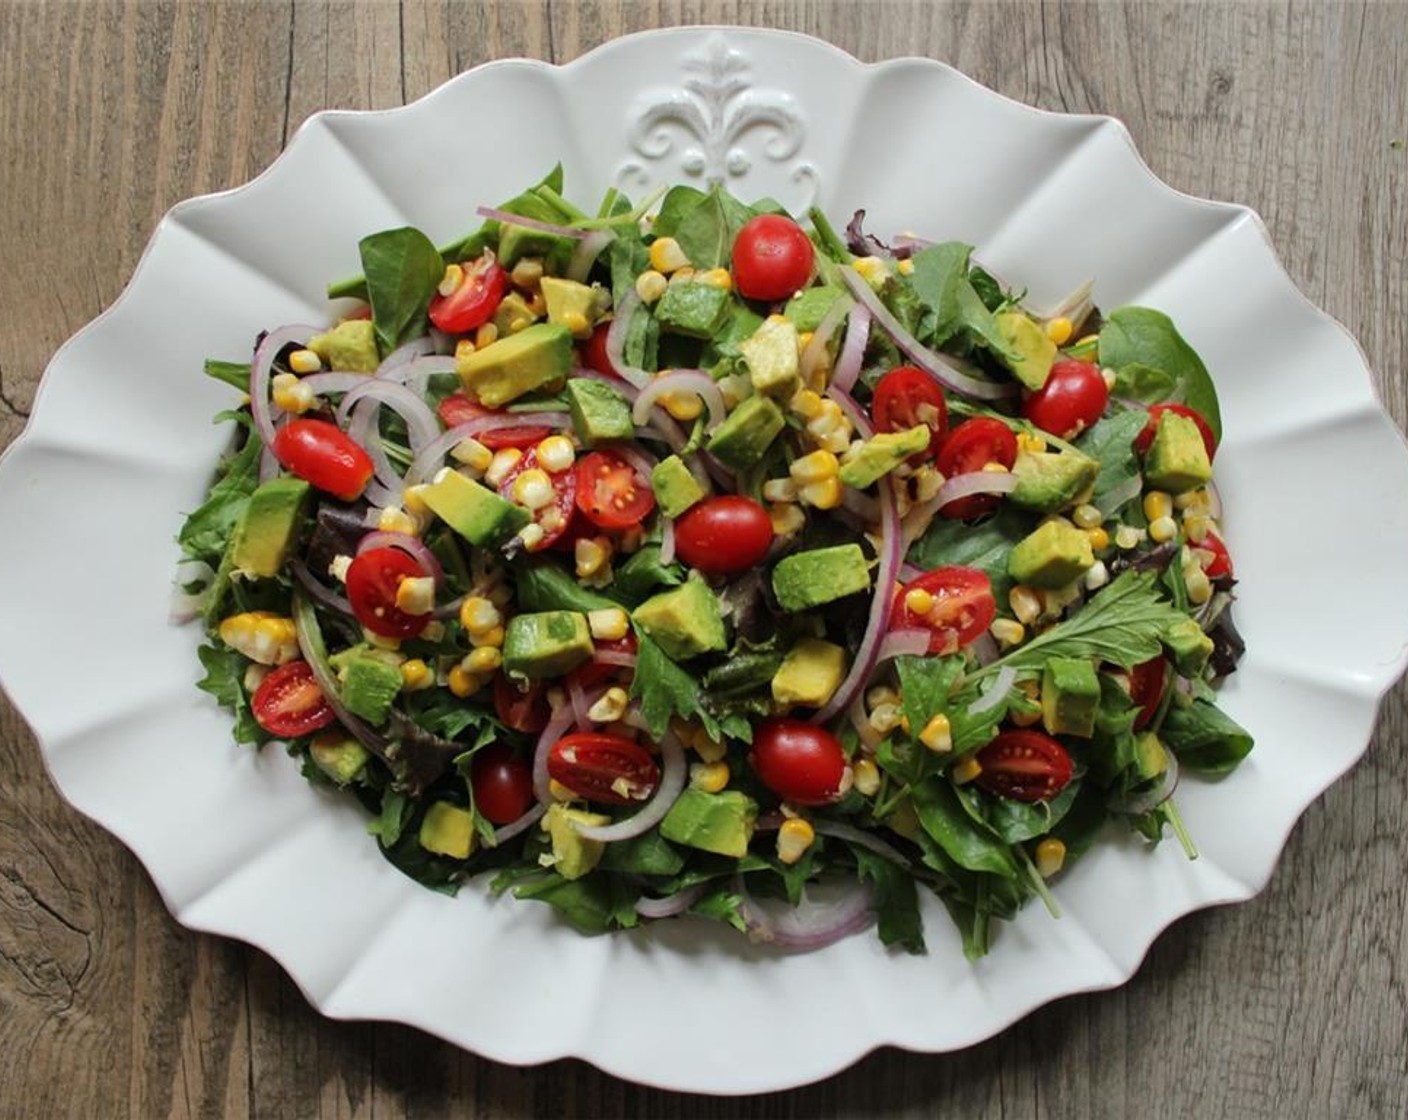 step 9 In a large bowl or on a platter, combine the Spring Mix Greens (4 cups), corn,Red Onion (1/2), Cherry Tomato (1 cup), and Avocado (1).